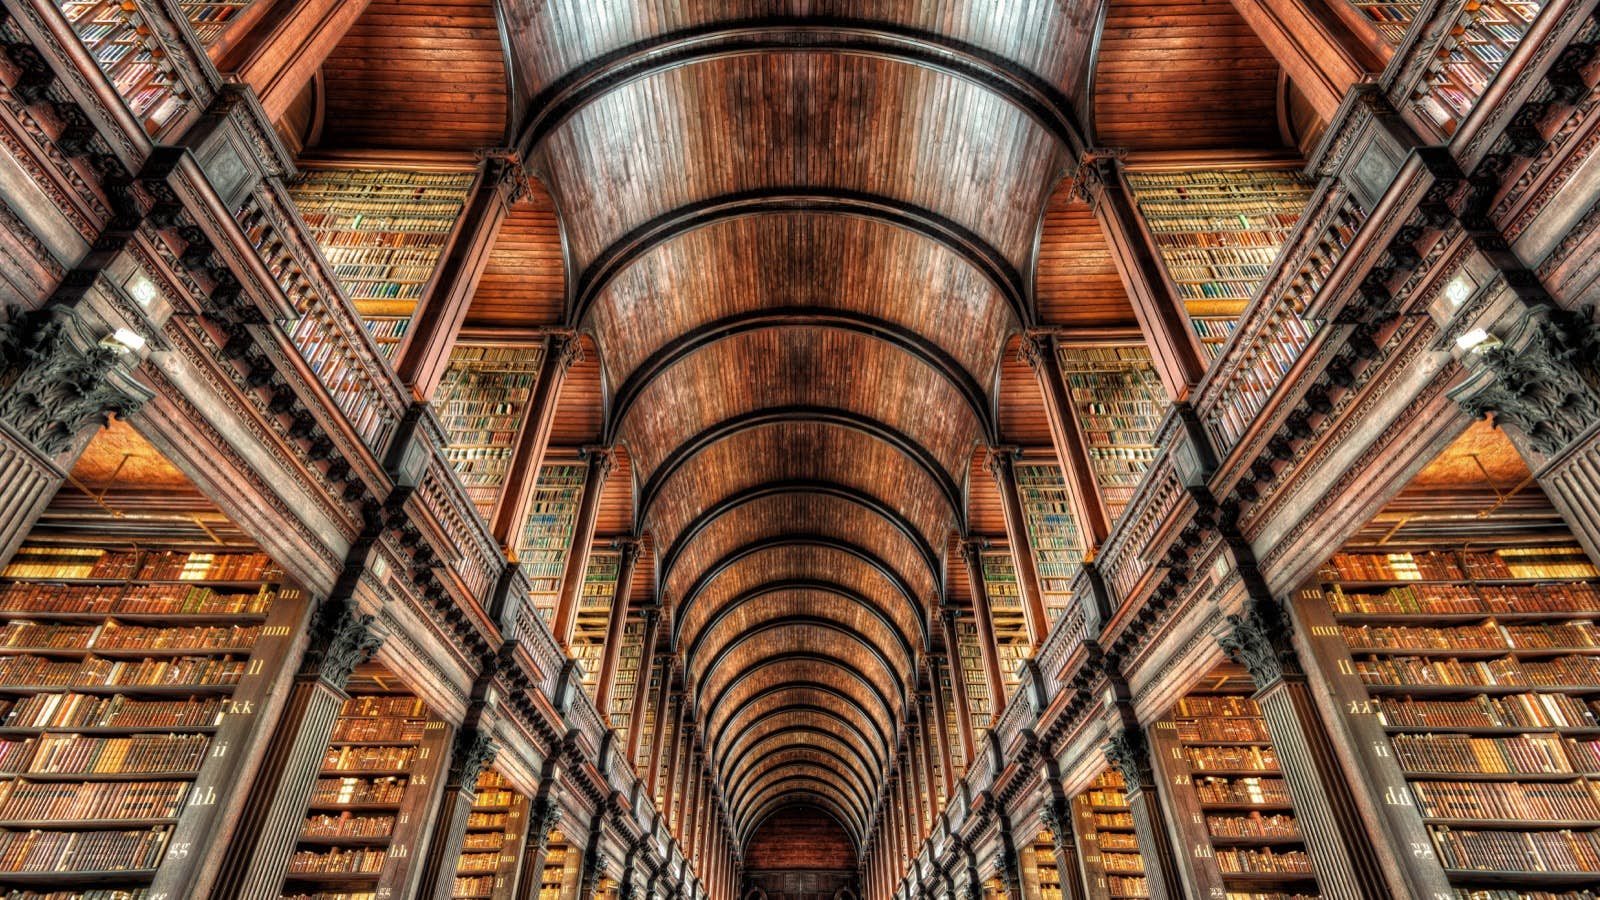 Europe’s most beautiful libraries